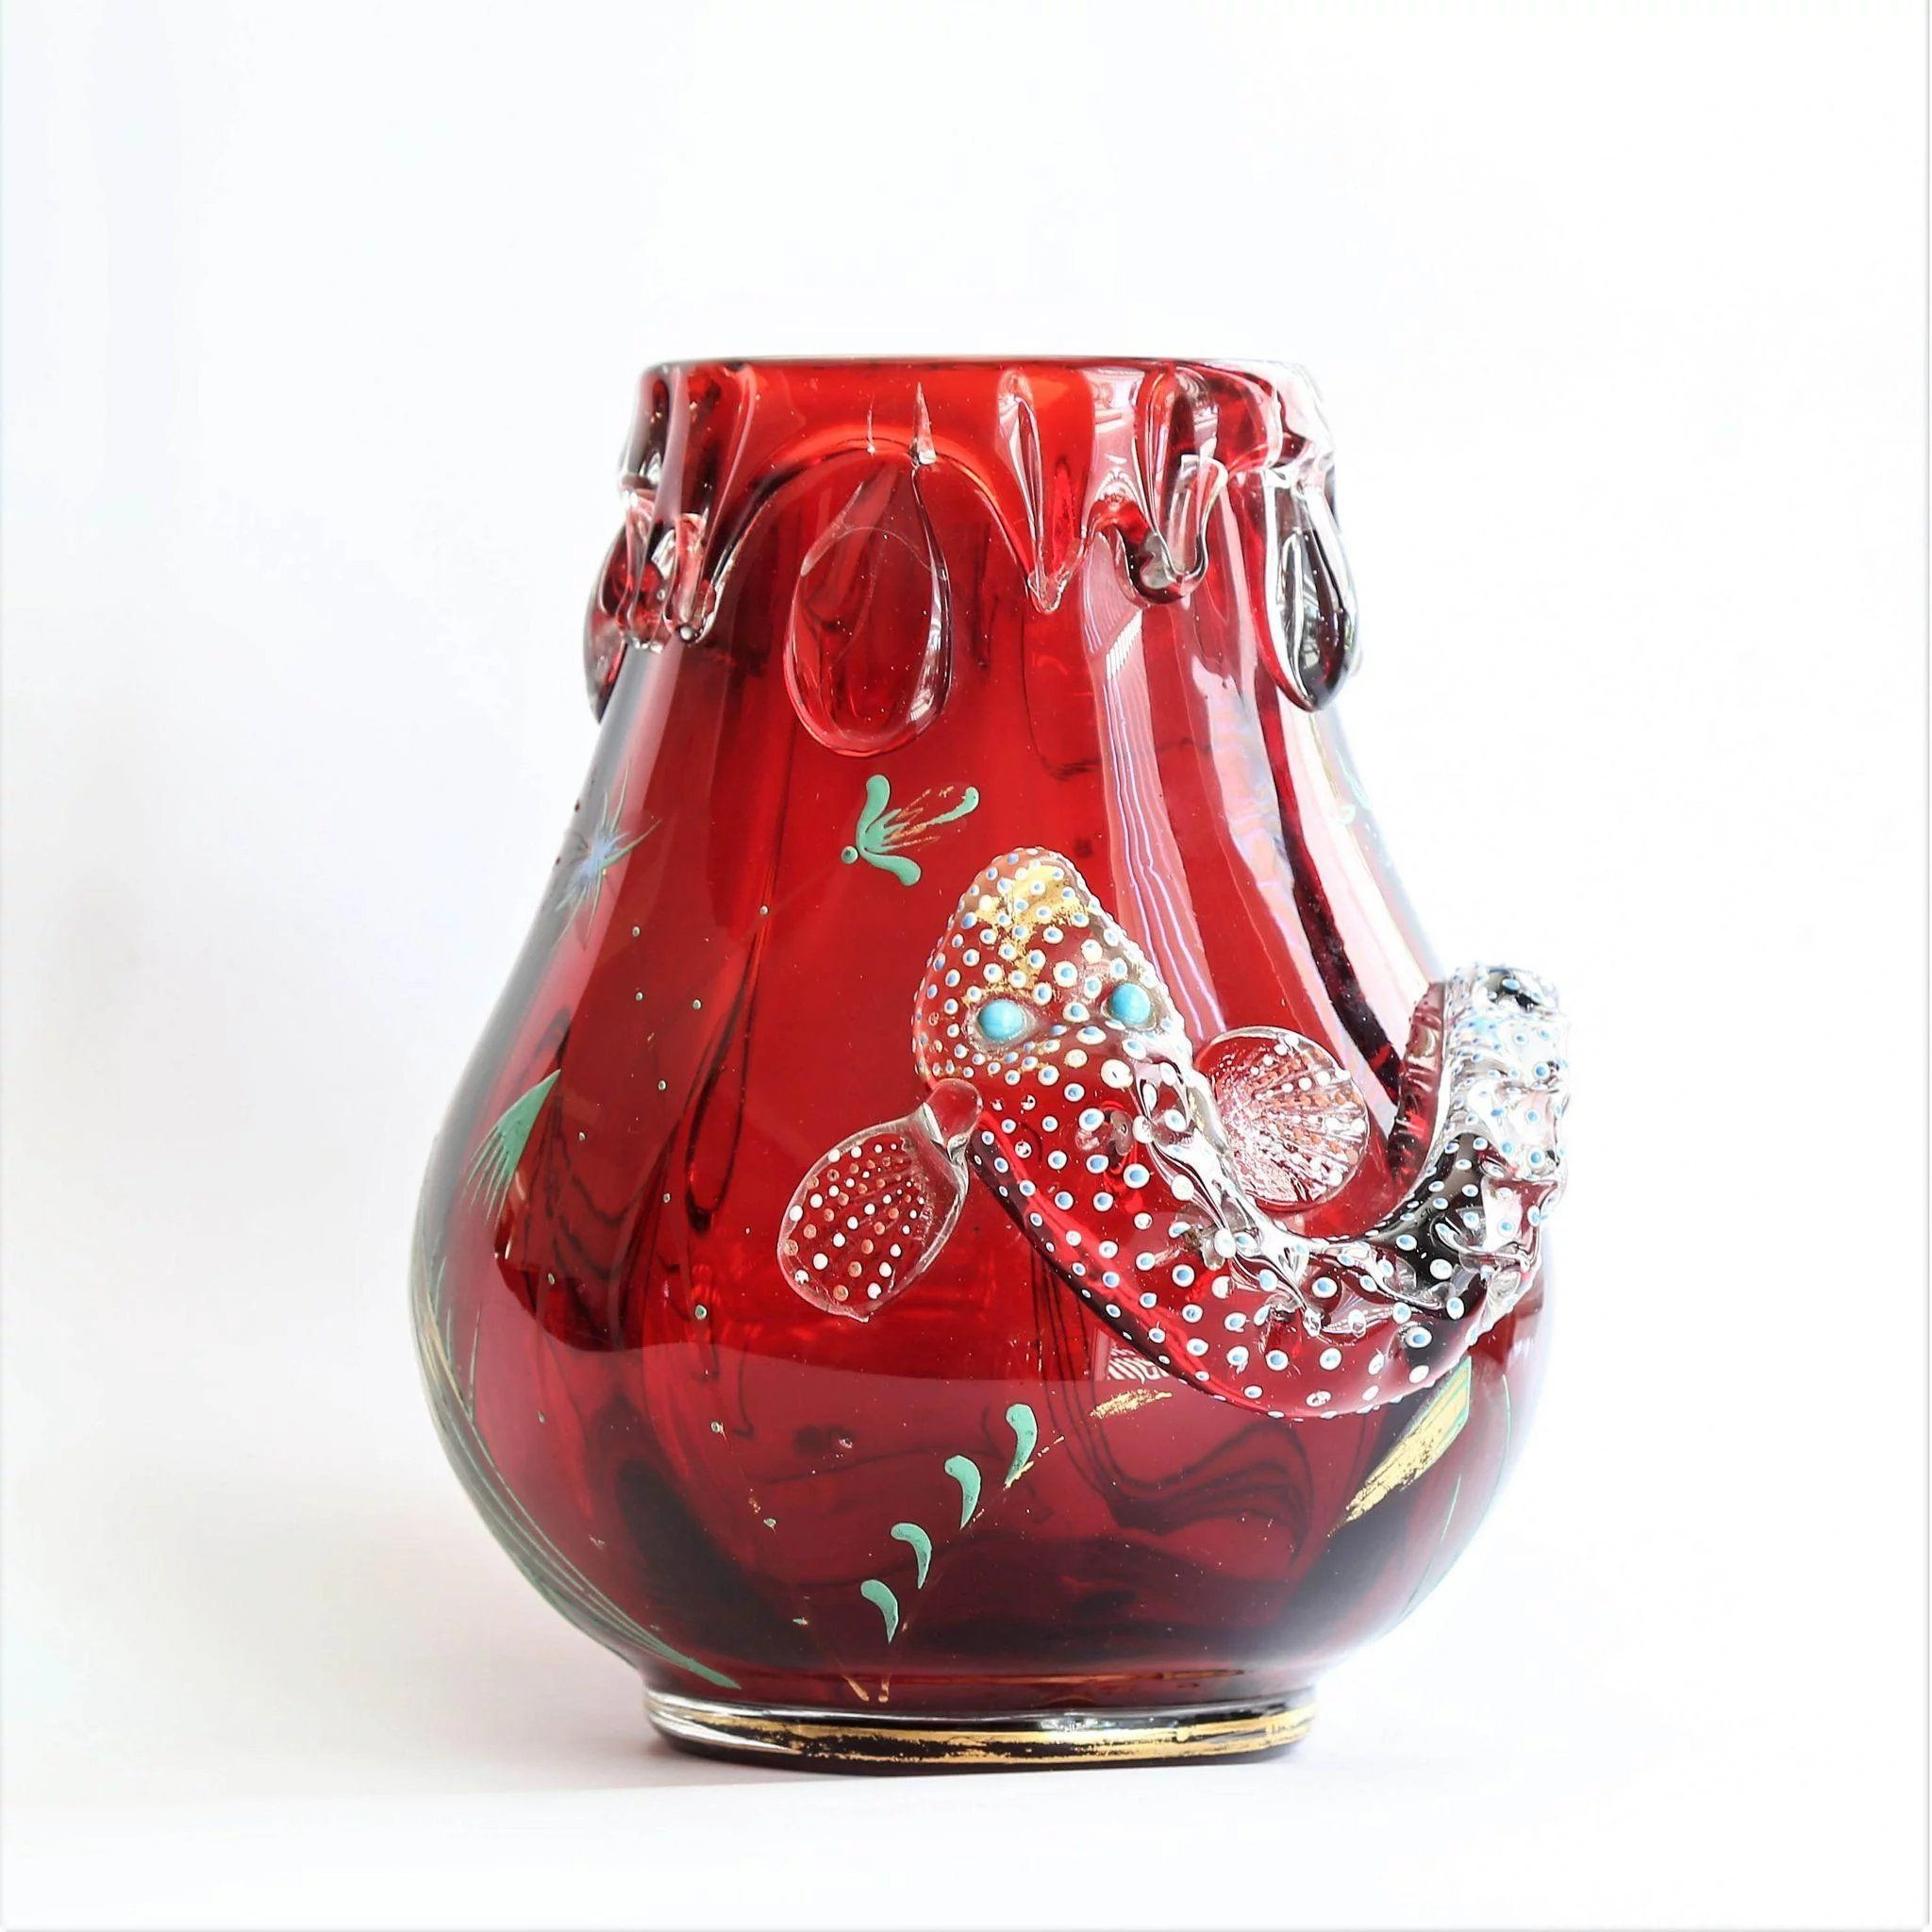 red glass vase of rare circa 1900 moser ruby red vase with enameled fish in 2018 throughout title rare circa 1900 moser ruby red vase with enameled fish price 995 usd category antiquesby period styleart nouveauantique art glass antique